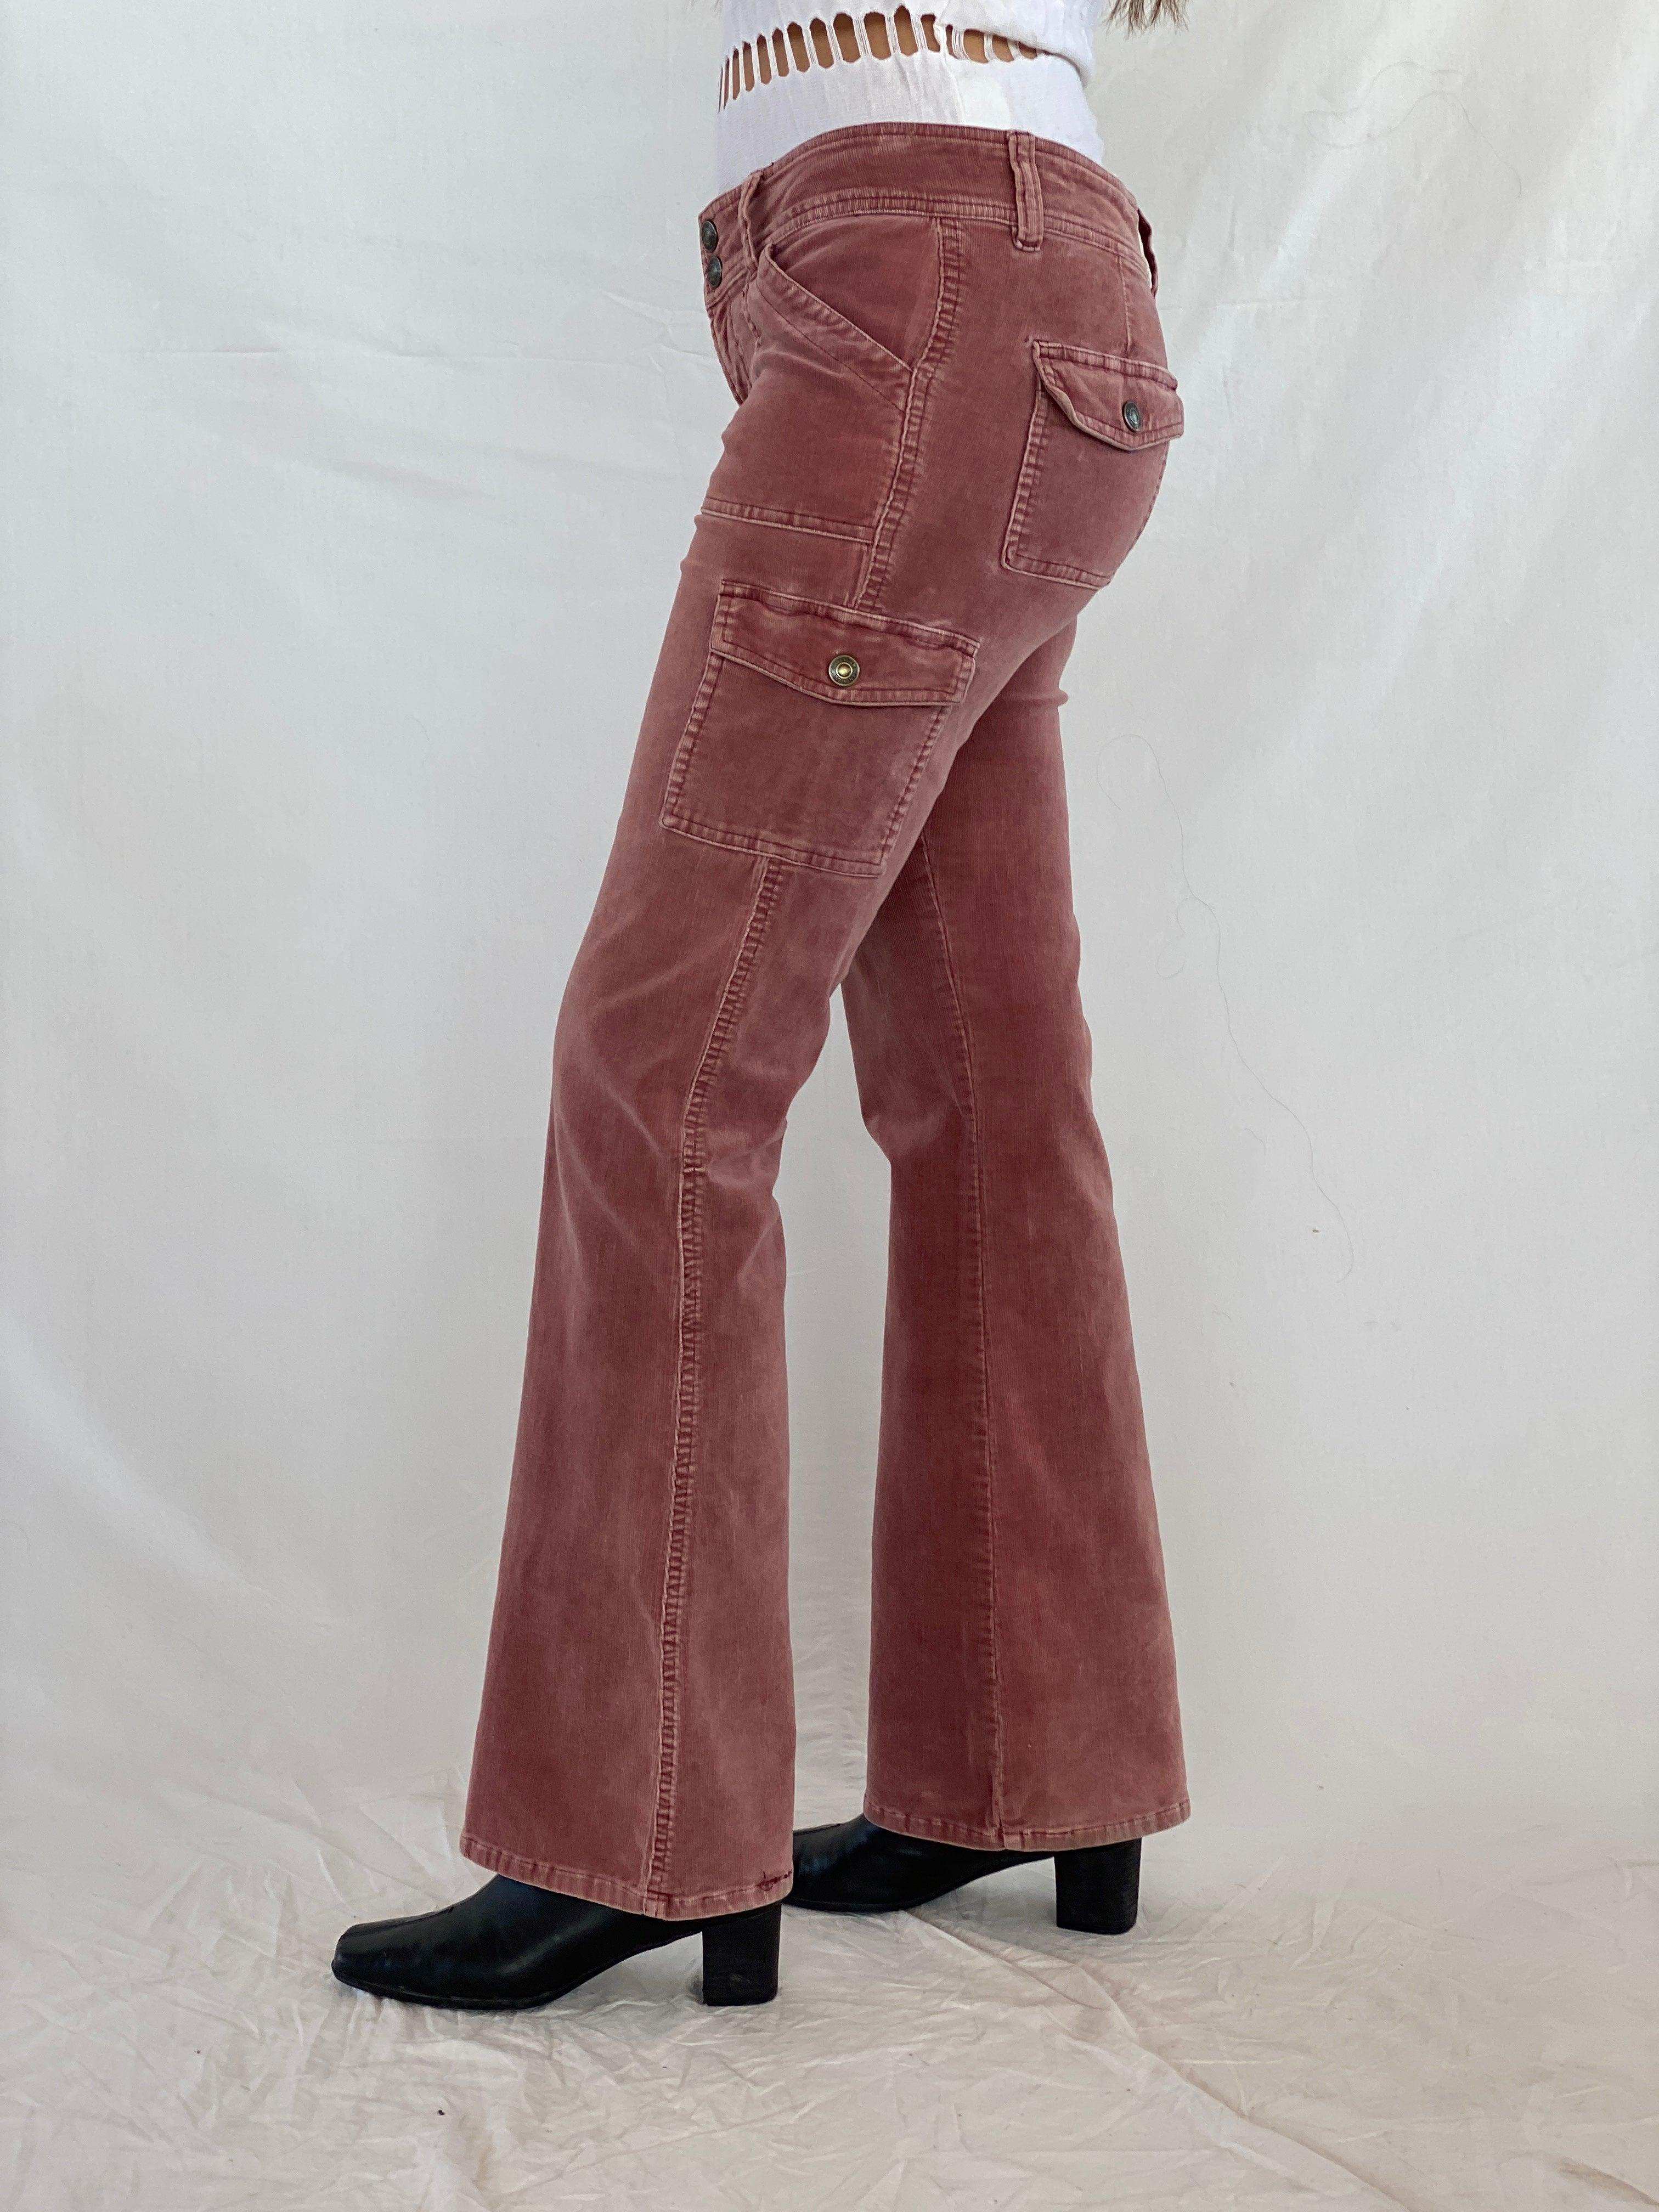 90s/00s Forever 21 Low Rise Flare Corduroy Pants - Balagan Vintage Corduroy Pants 00s, 90s, corduroy, corduroy pants, Juana, NEW IN